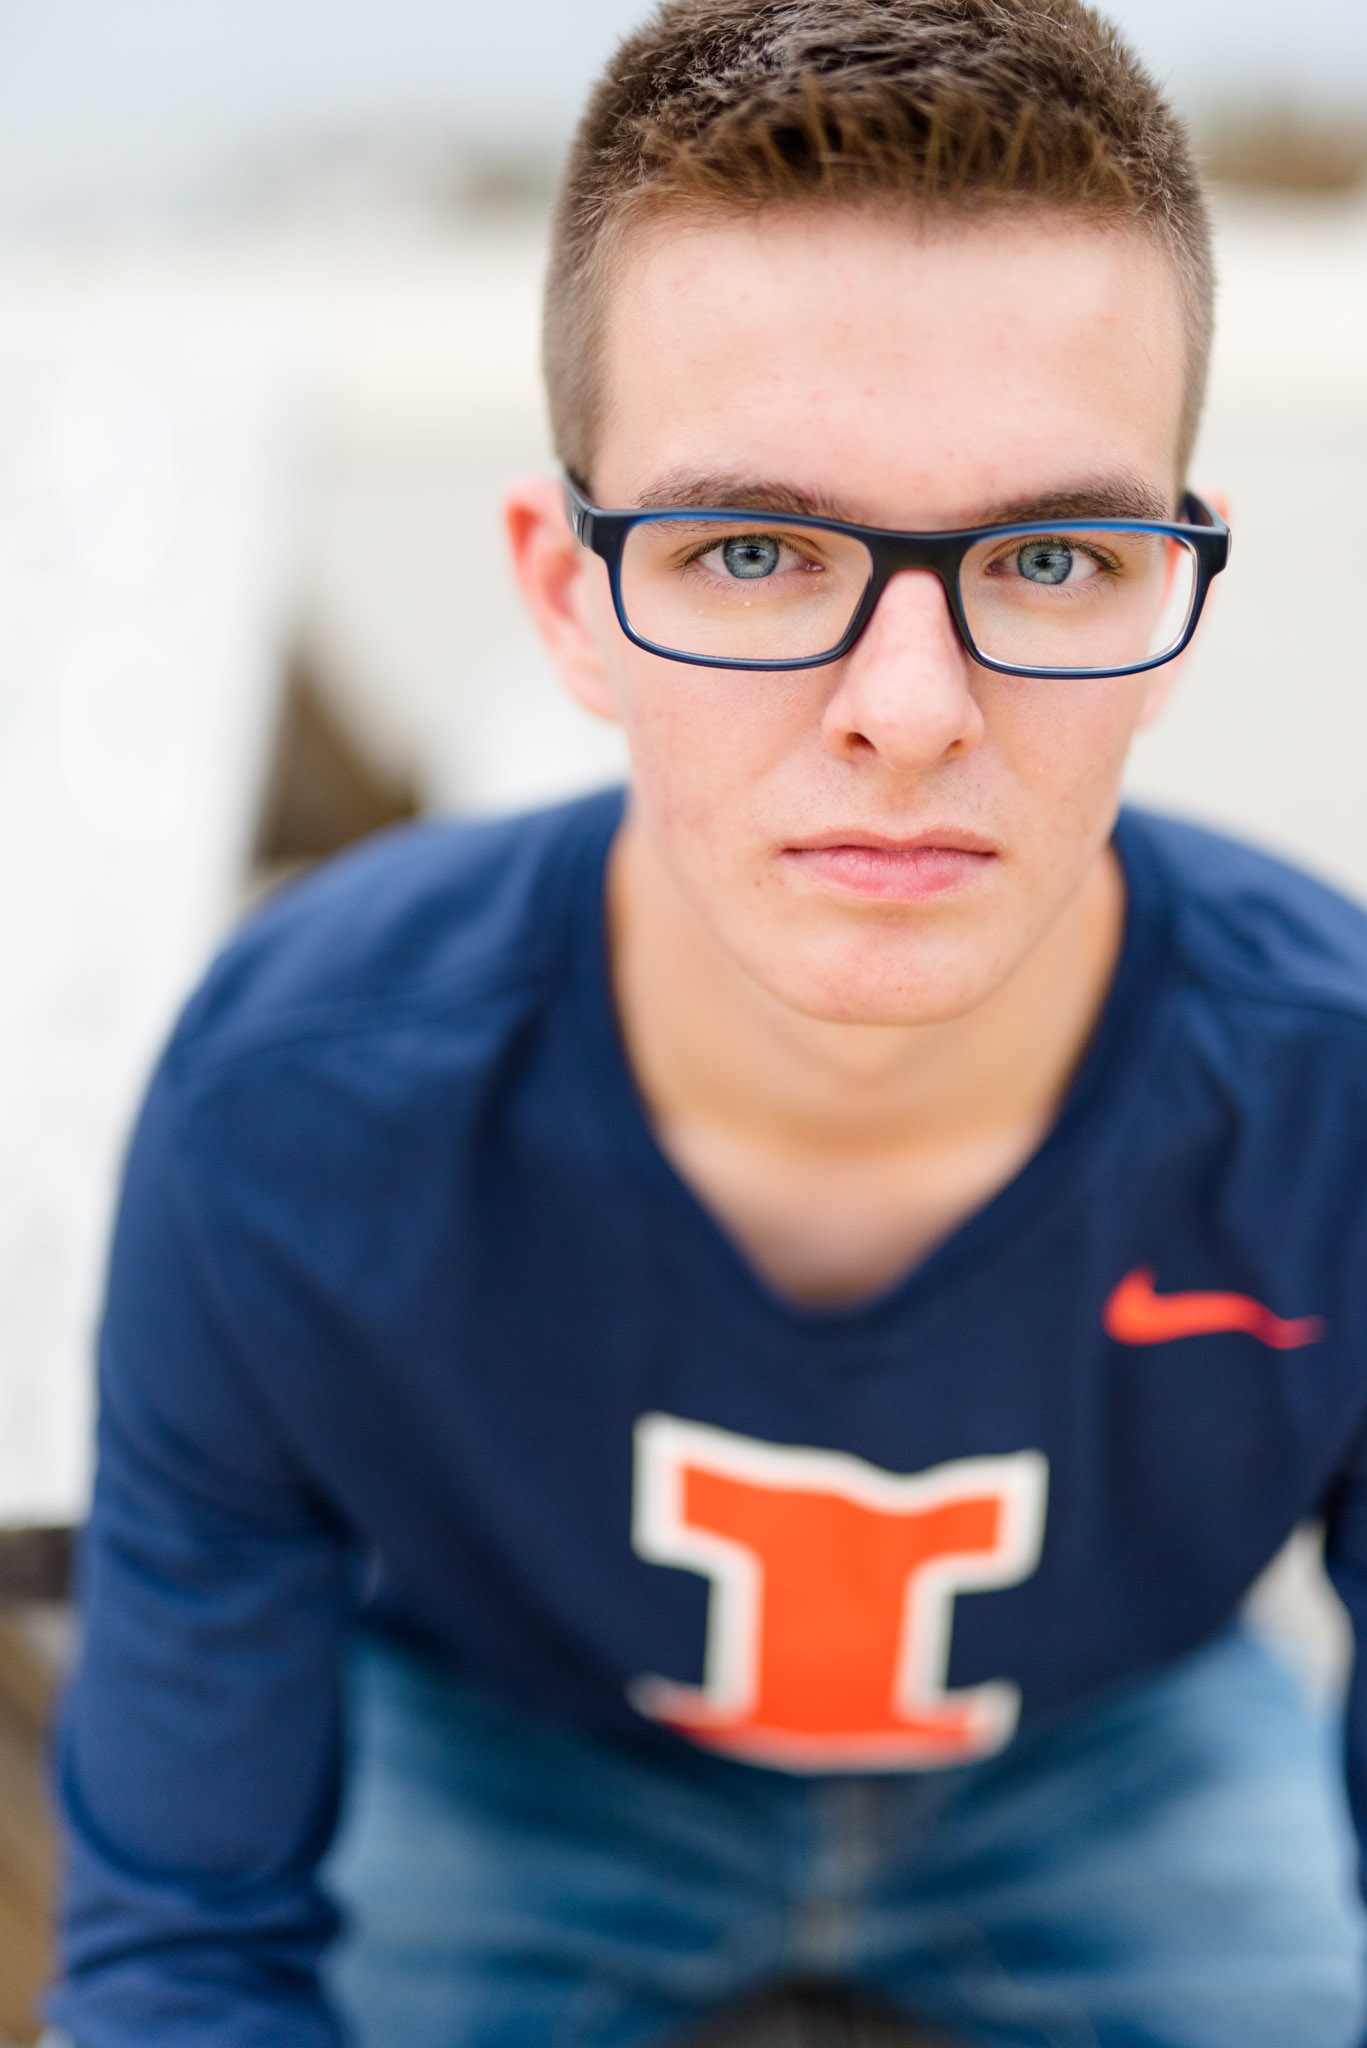 Senior guy with glasses sits on bench.